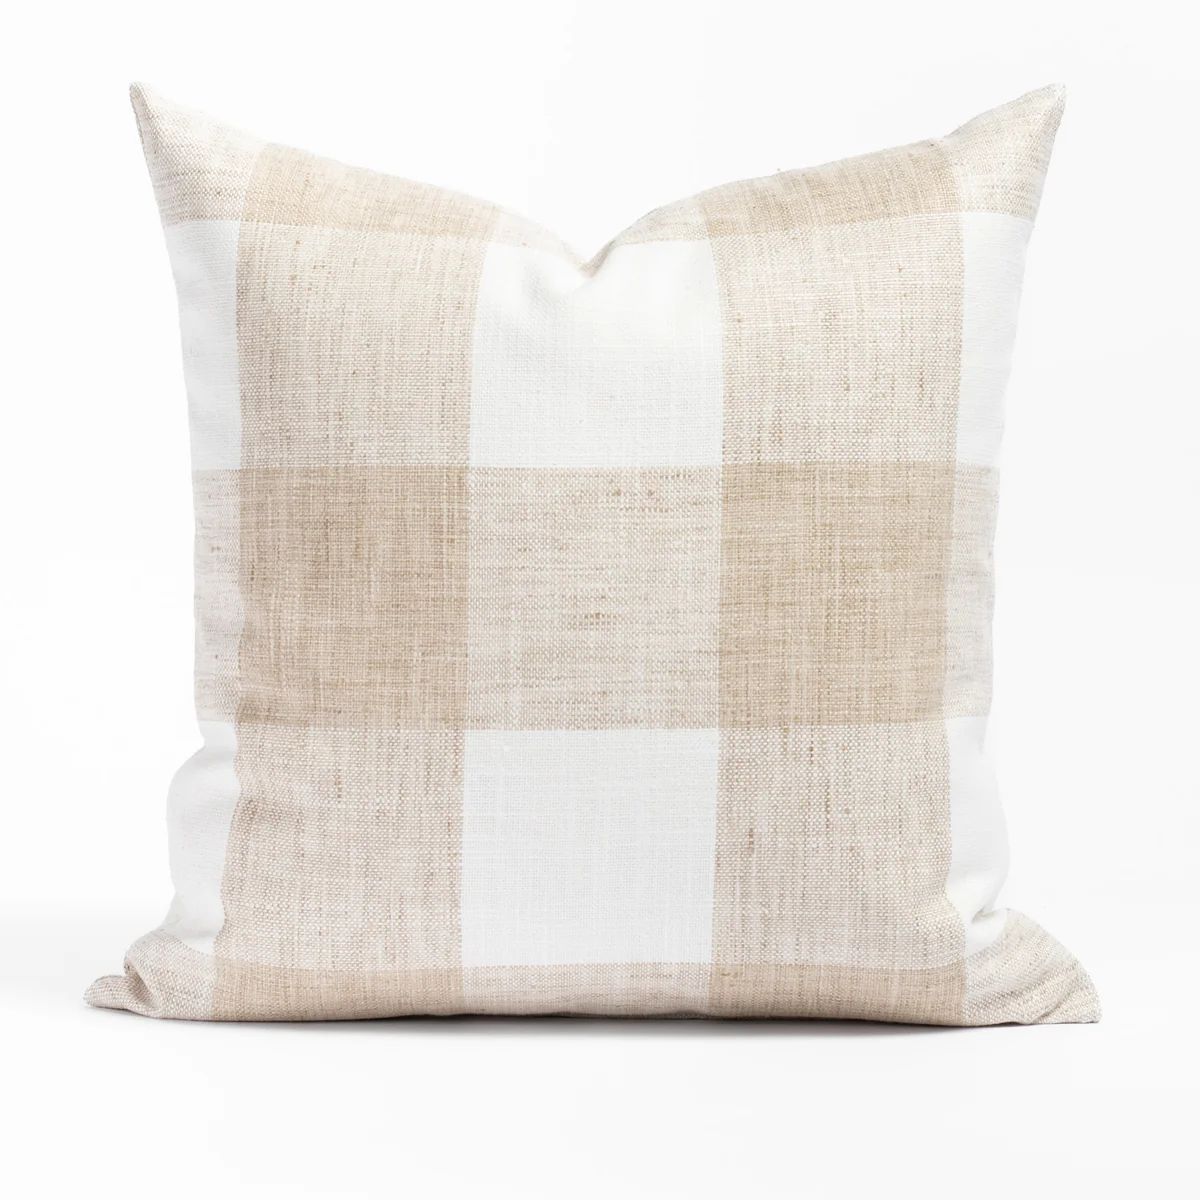 Oliver Check 20x20 Pillow, Natural | Tonic Living